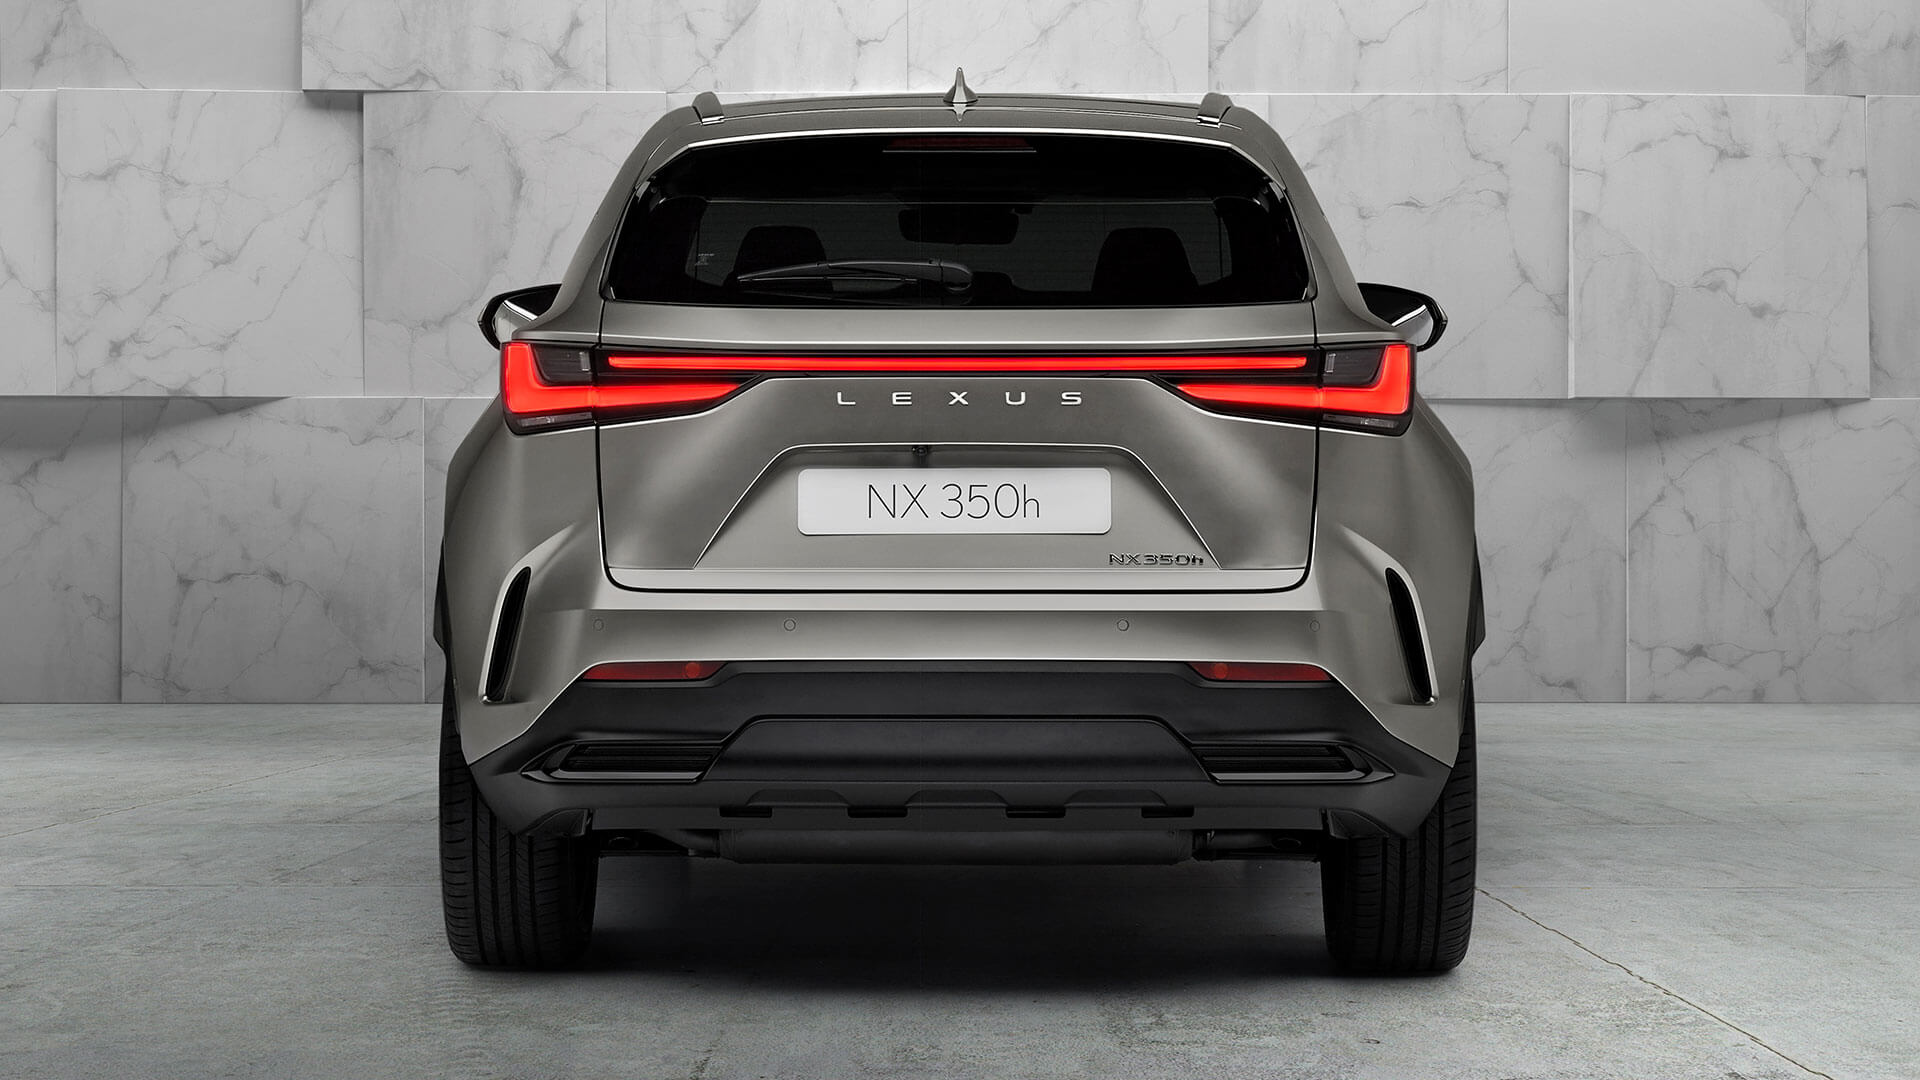 2021-lexus-all-new-nx-overview-350h-gallery-03-1920x1080